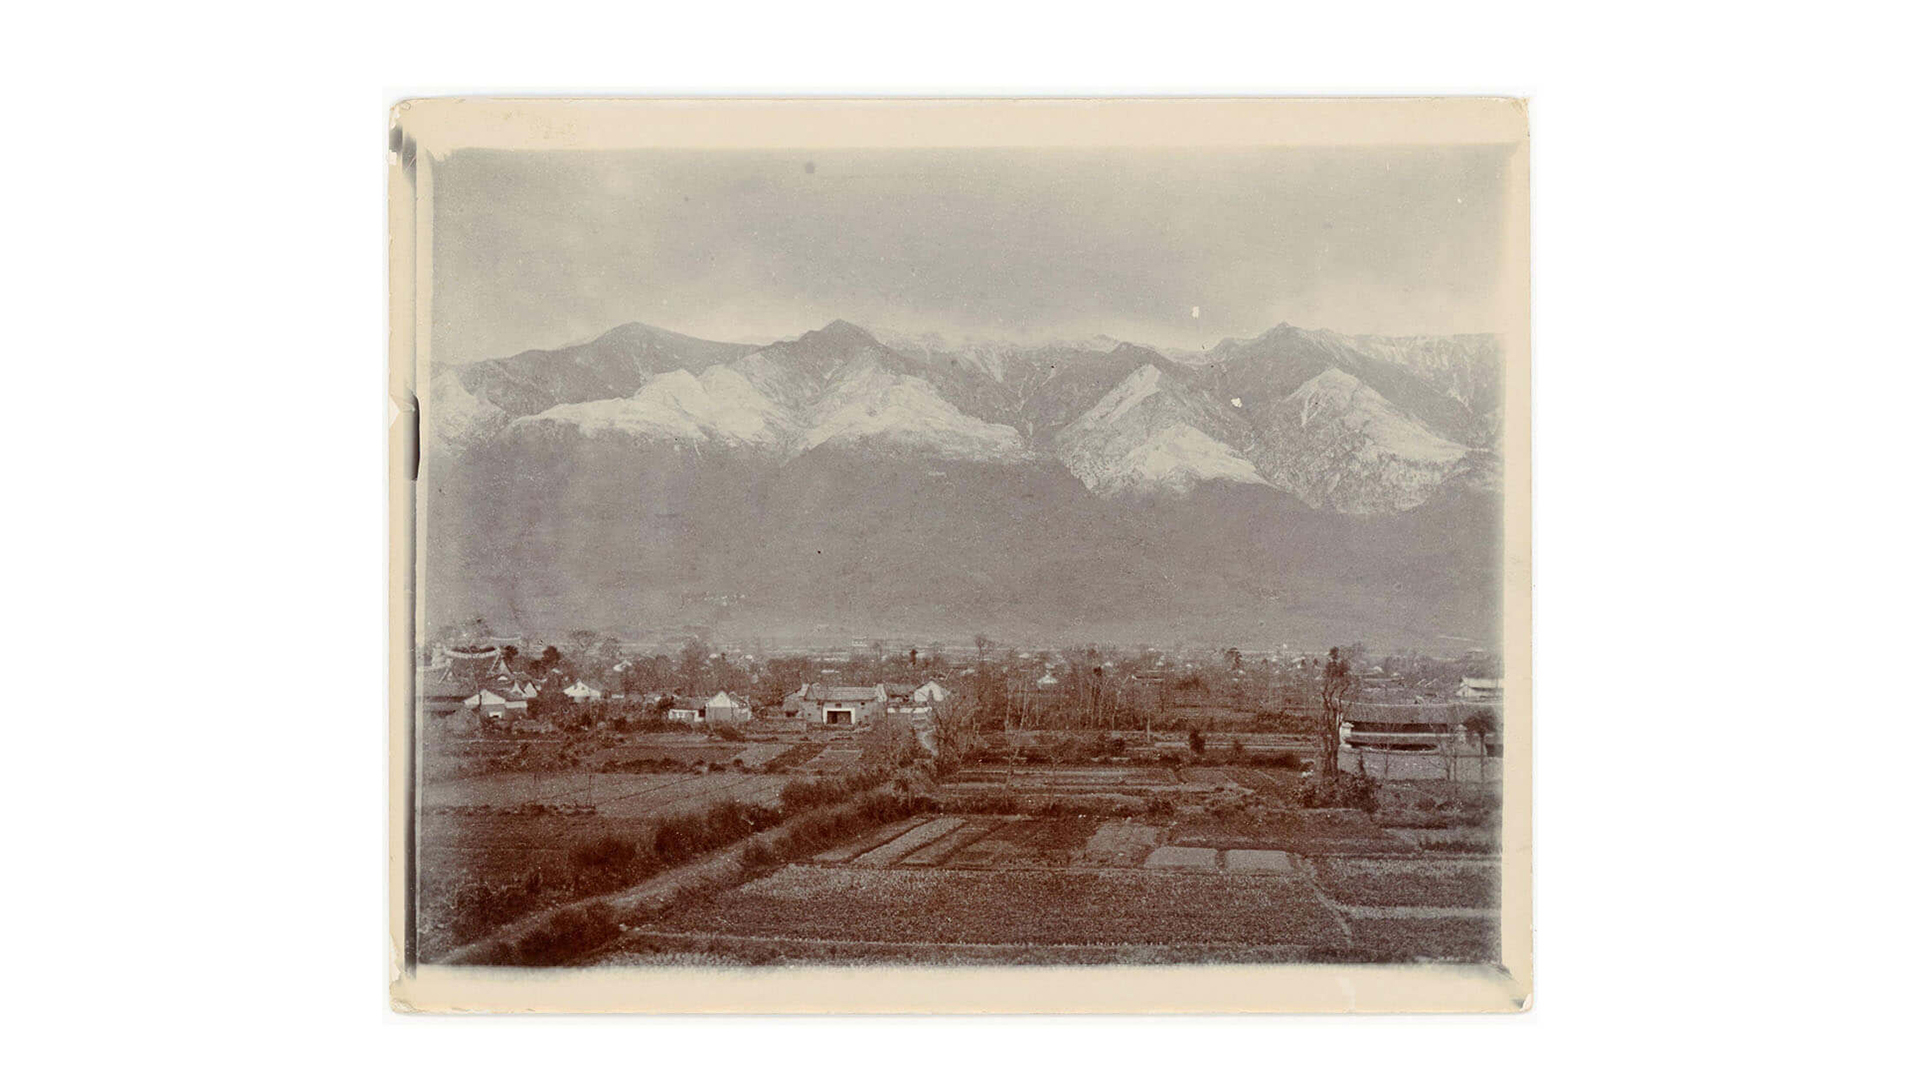 View of the mountains in Dali, taken from the east wall looking west.